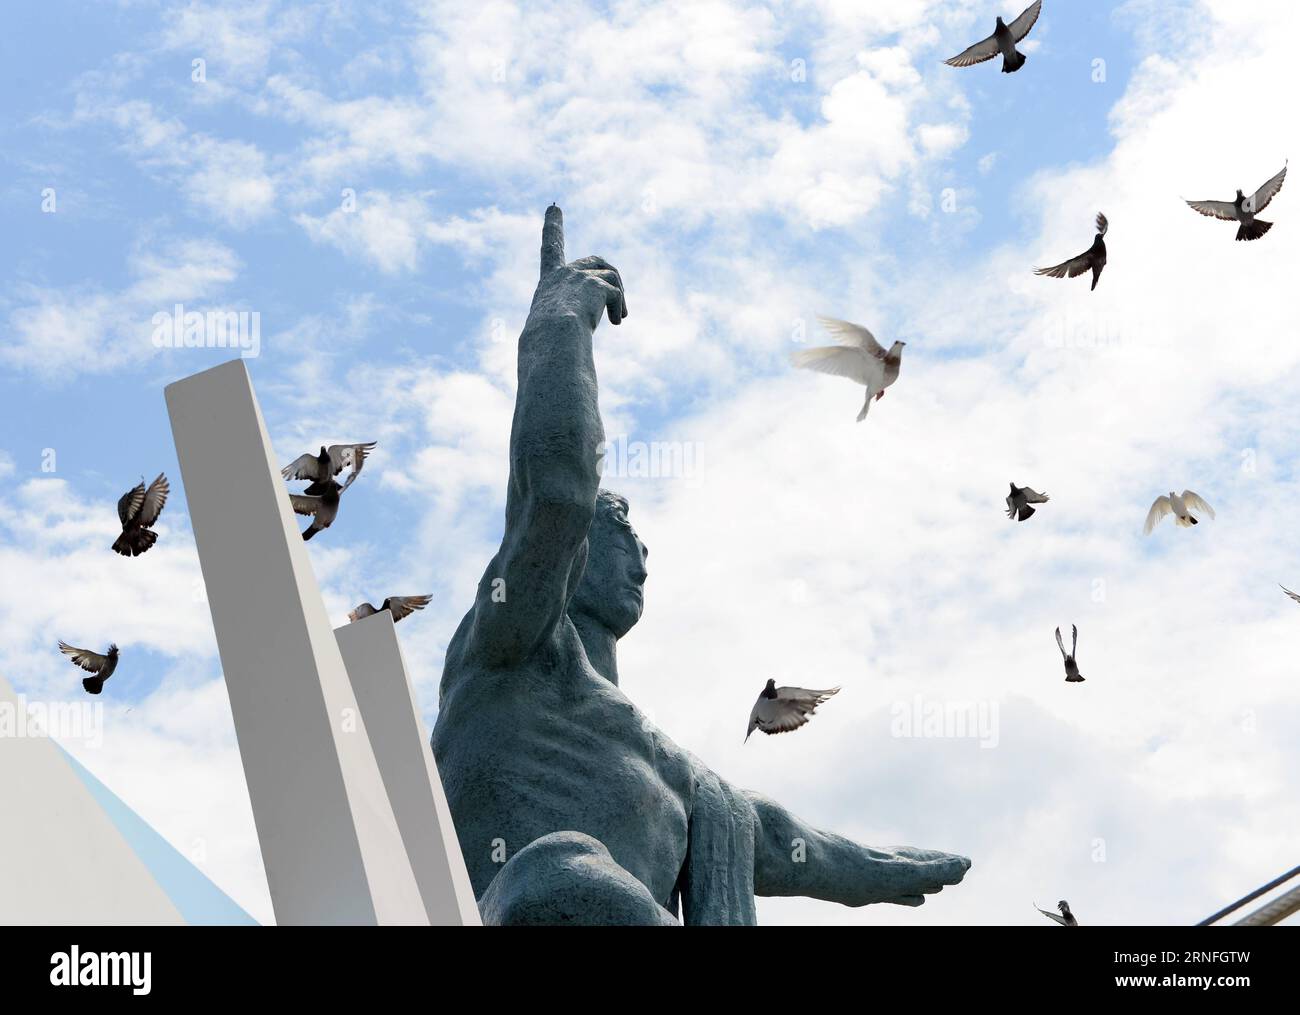 Bilder des Tages (160809) -- NAGASAKI, Aug. 9, 2016 -- Pigeons fly around the Peace Statue at the Peace Park in Nagasaki, on Aug. 9, 2016, the 71st anniversary of U.S. atomic bombing. To accelerate Japan s surrender in the World War II, the U.S. forces dropped two atomic bombs on Hiroshima and Nagasaki respectively on Aug. 6 and 9, 1945. ) (syq) JAPAN-NAGASAKI-ATOMIC BOMBING-71ST ANNIVERSARY-COMMEMORATION MaxPing PUBLICATIONxNOTxINxCHN   Images the Day 160809 Nagasaki Aug 9 2016 pigeons Fly Around The Peace Statue AT The Peace Park in Nagasaki ON Aug 9 2016 The 71st Anniversary of U S Atomic B Stock Photo